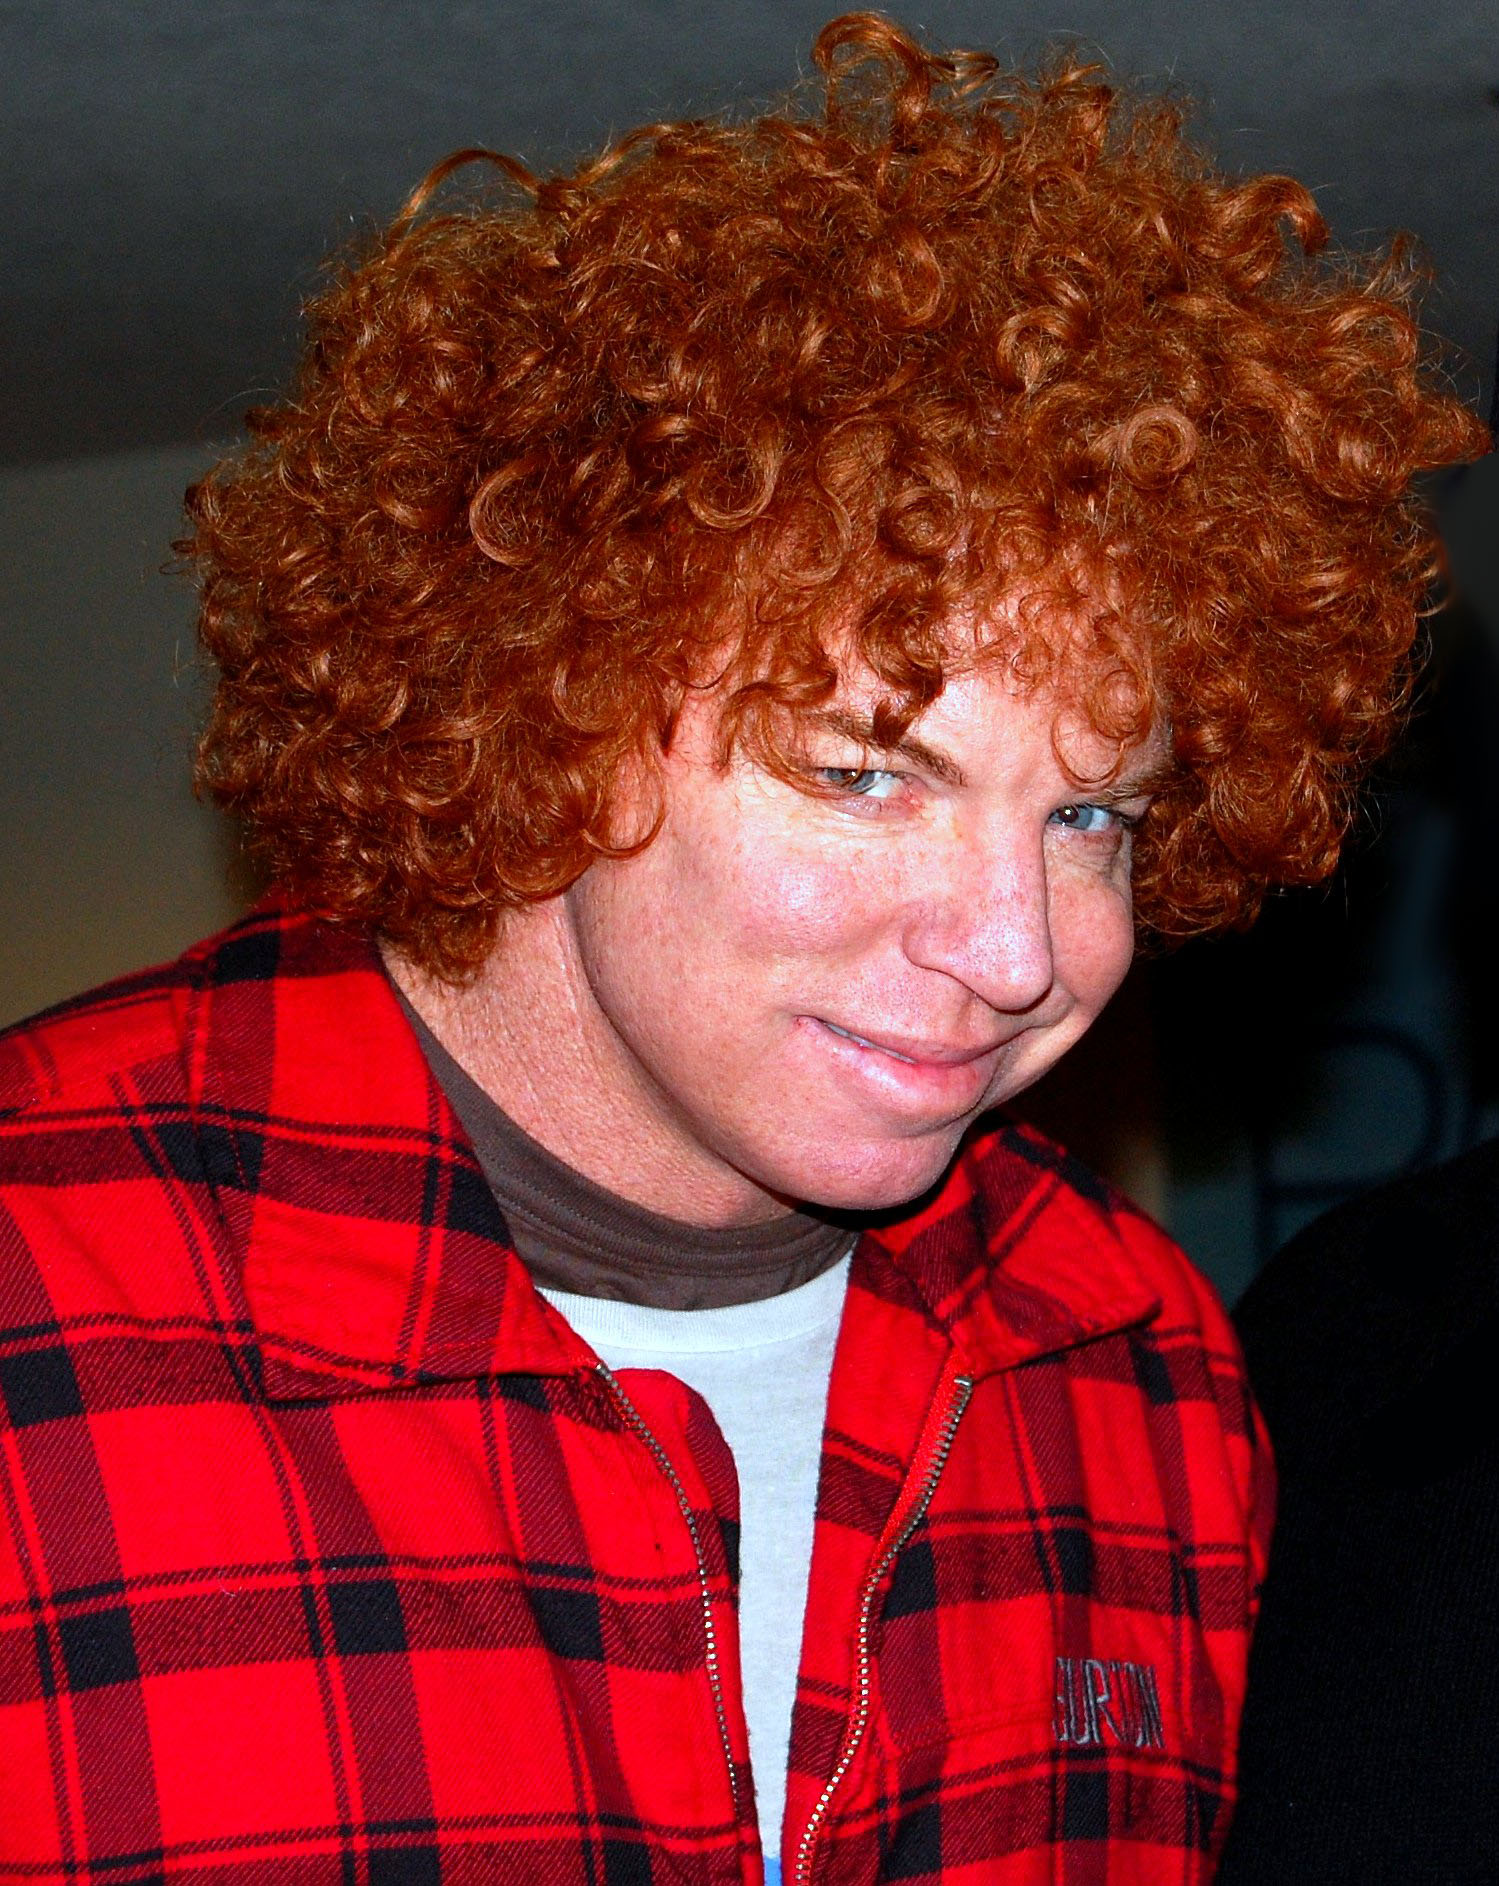 http://upload.wikimedia.org/wikipedia/commons/8/8a/CarrotTop.jpg